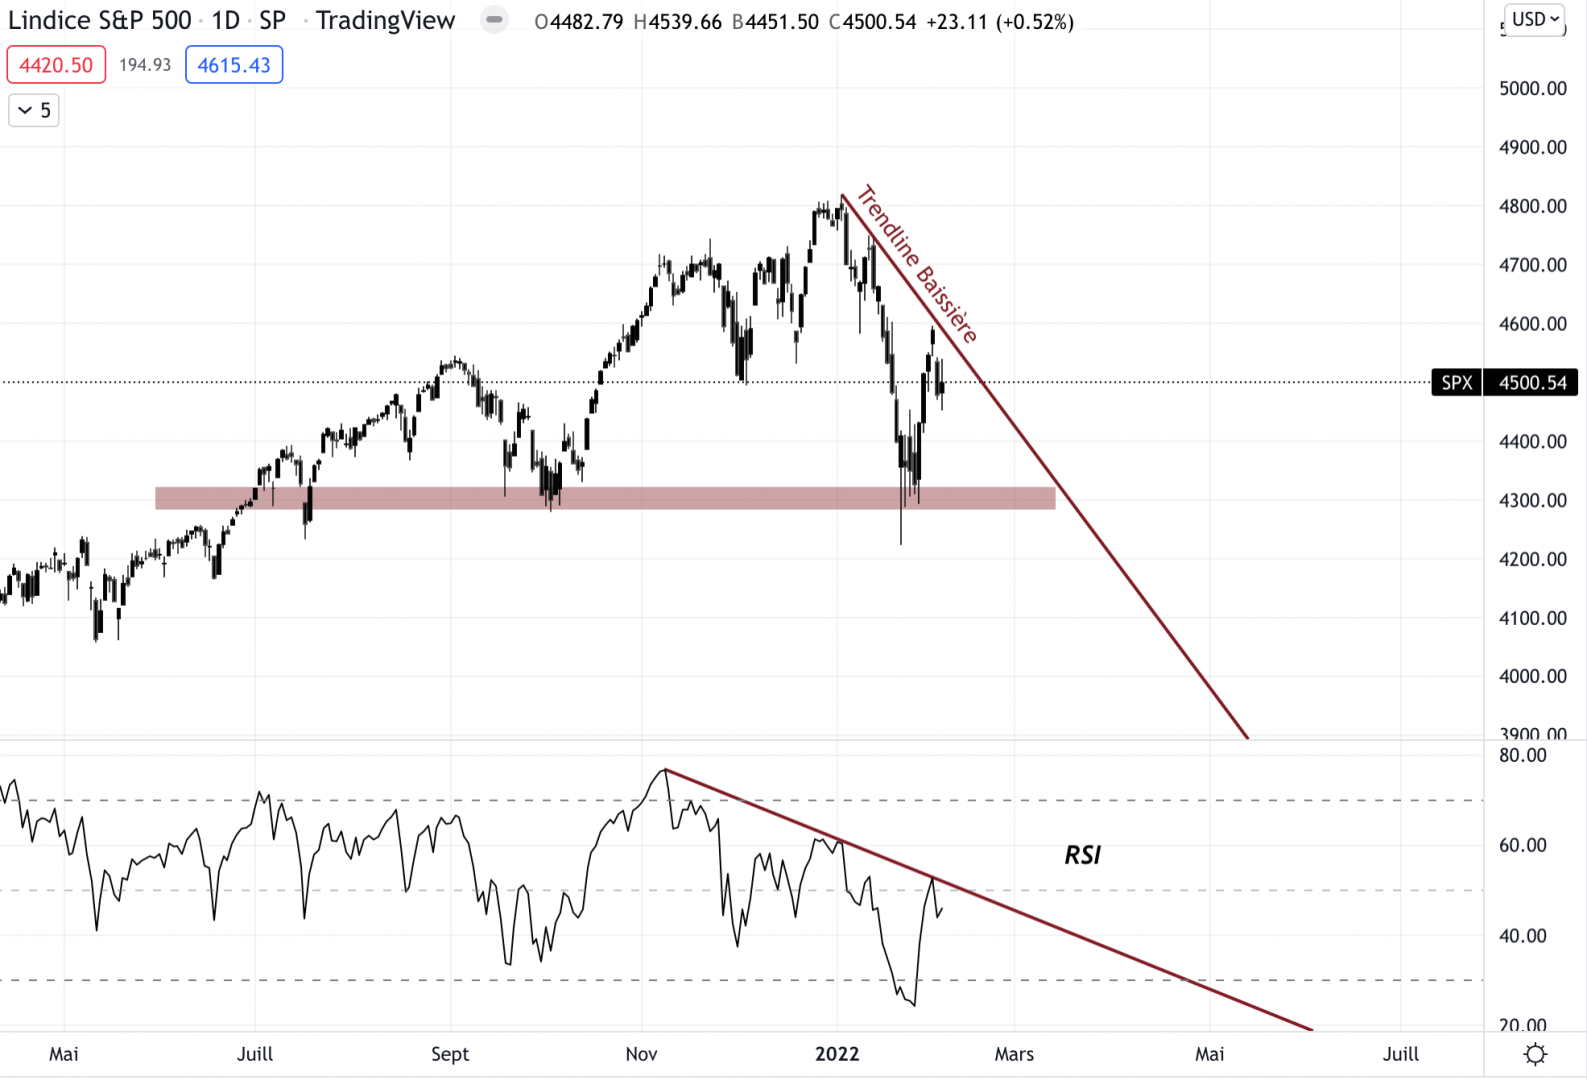 The price of the S&P 500 rebounds on an important zone.